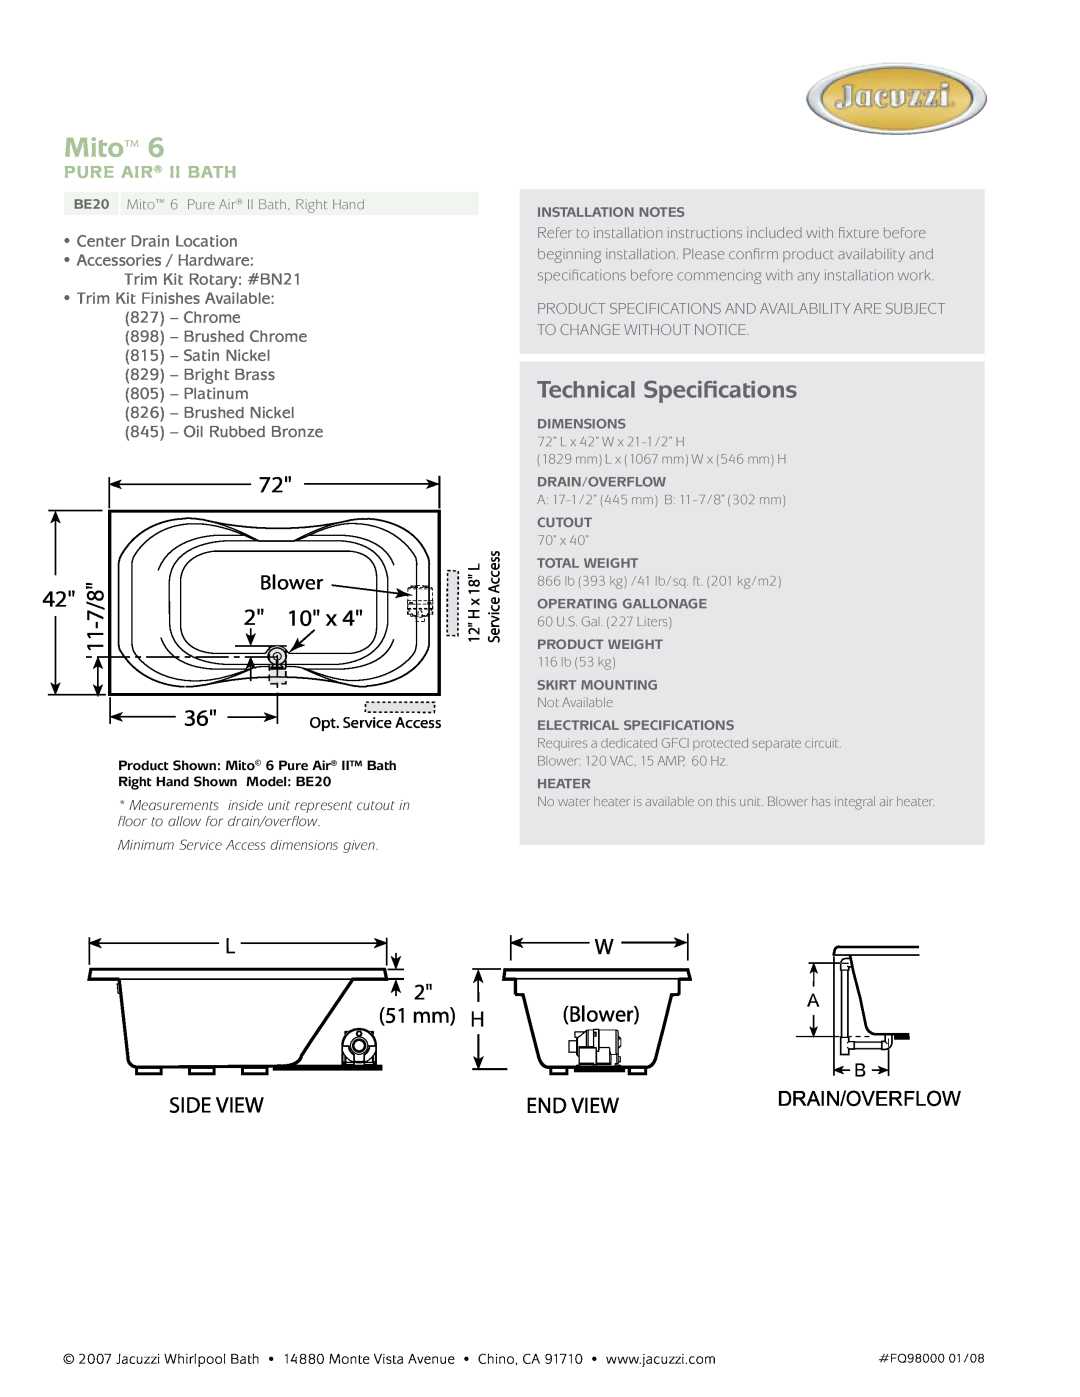 Jacuzzi BE20 Center Drain Location Accessories / Hardware Trim Kit Rotary #BN21, Brushed Nickel 845 - Oil Rubbed Bronze 